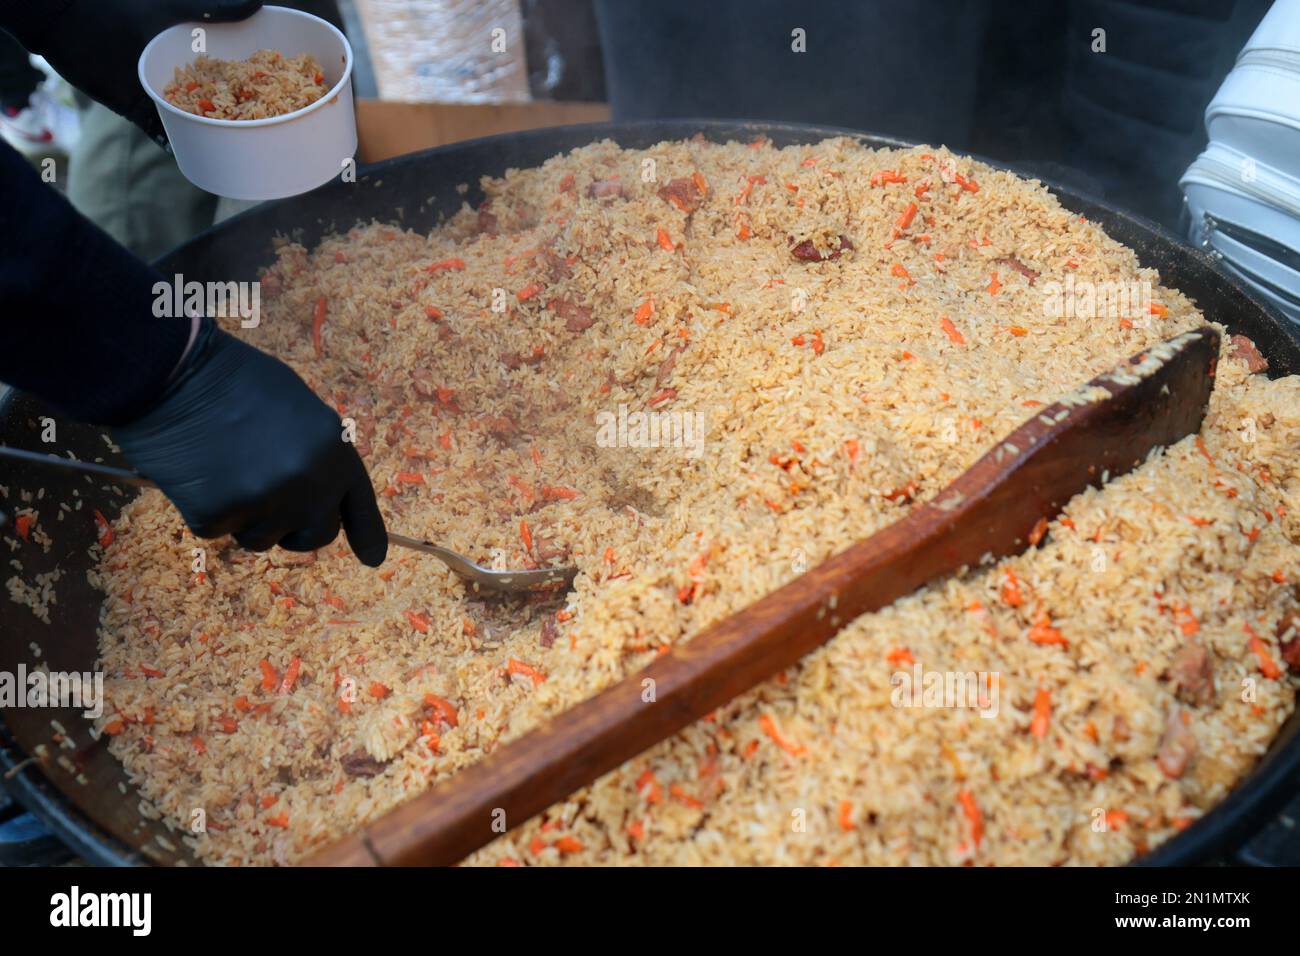 LVIV, UKRAINE - FEBRUARY 01, 2023 - Guests of the event are treated to traditional Kazakh pilaf during the opening of the fourth Yurt of Invincibility in Ukraine, a large tent where residents can eat and warm up, Lviv, capital of Ukraine. Stock Photo